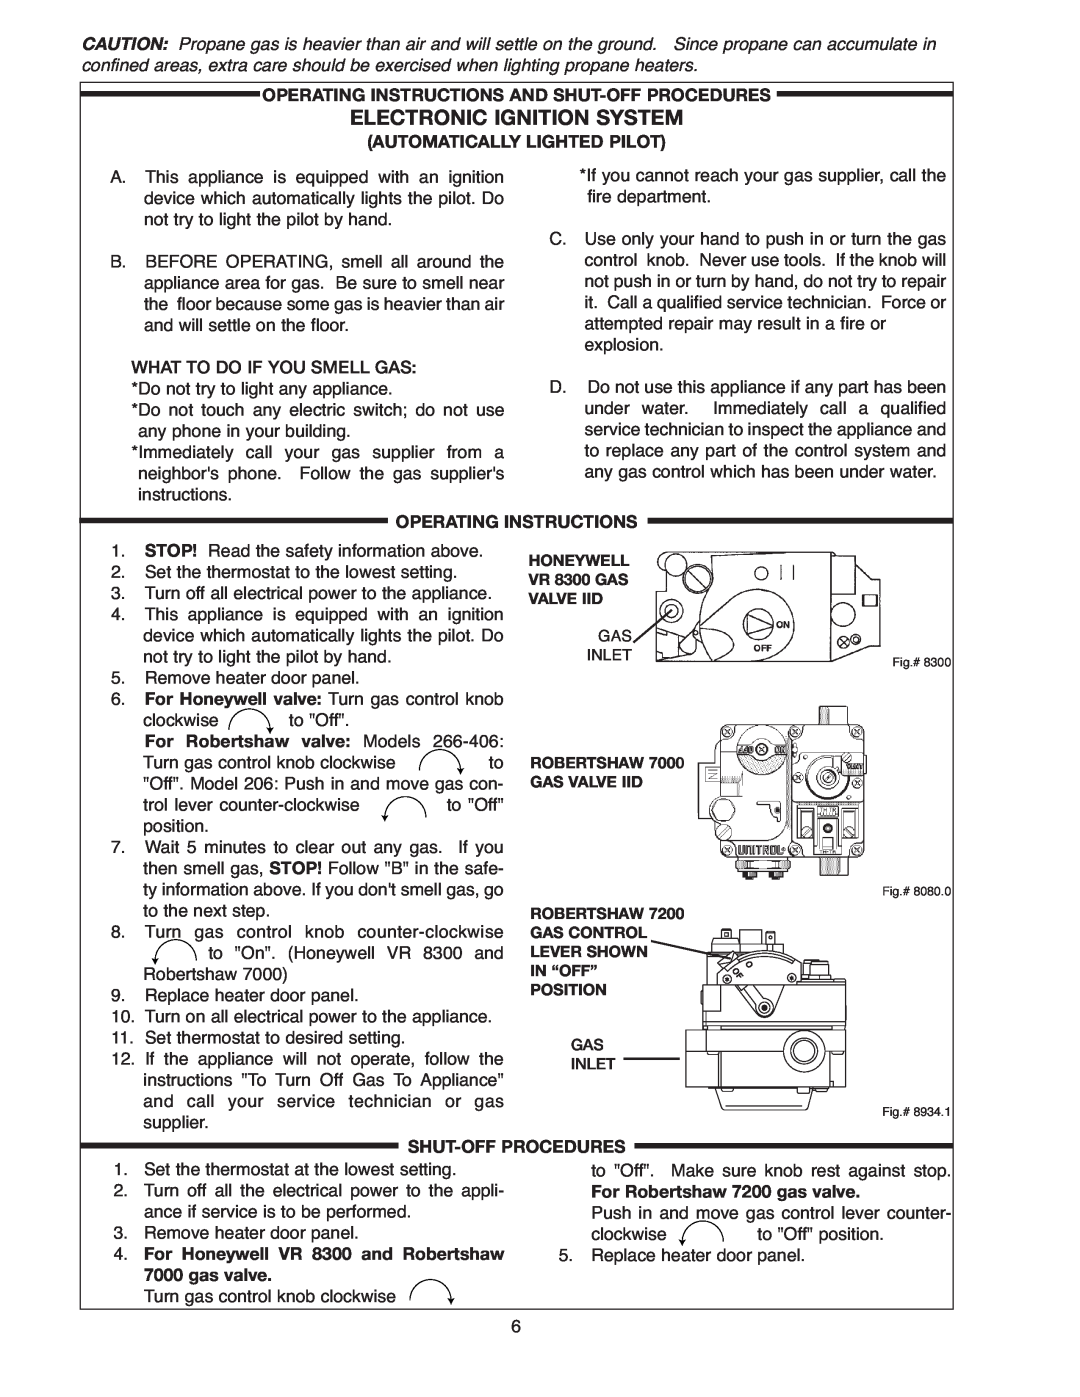 Raypak 267A, 406A Operating Instructions And Shut-Off Procedures, Automatically Lighted Pilot, For Robertshaw valve Models 